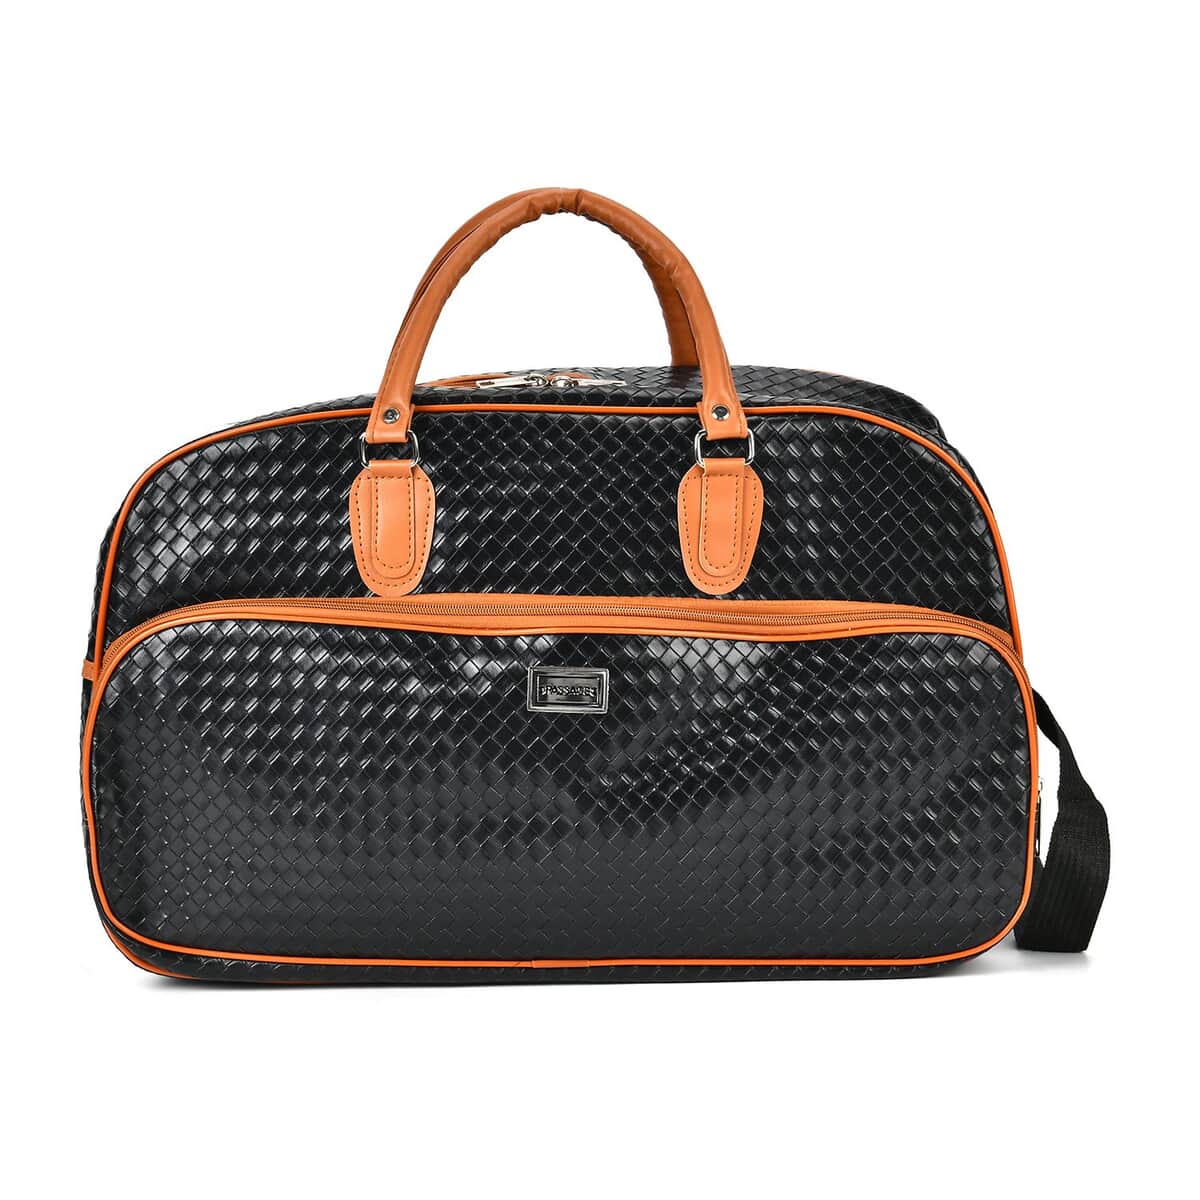 Black Woven Embossed Pattern Faux Leather Travel Bag with Handle Drop and Detachable Shoulder Strap image number 0